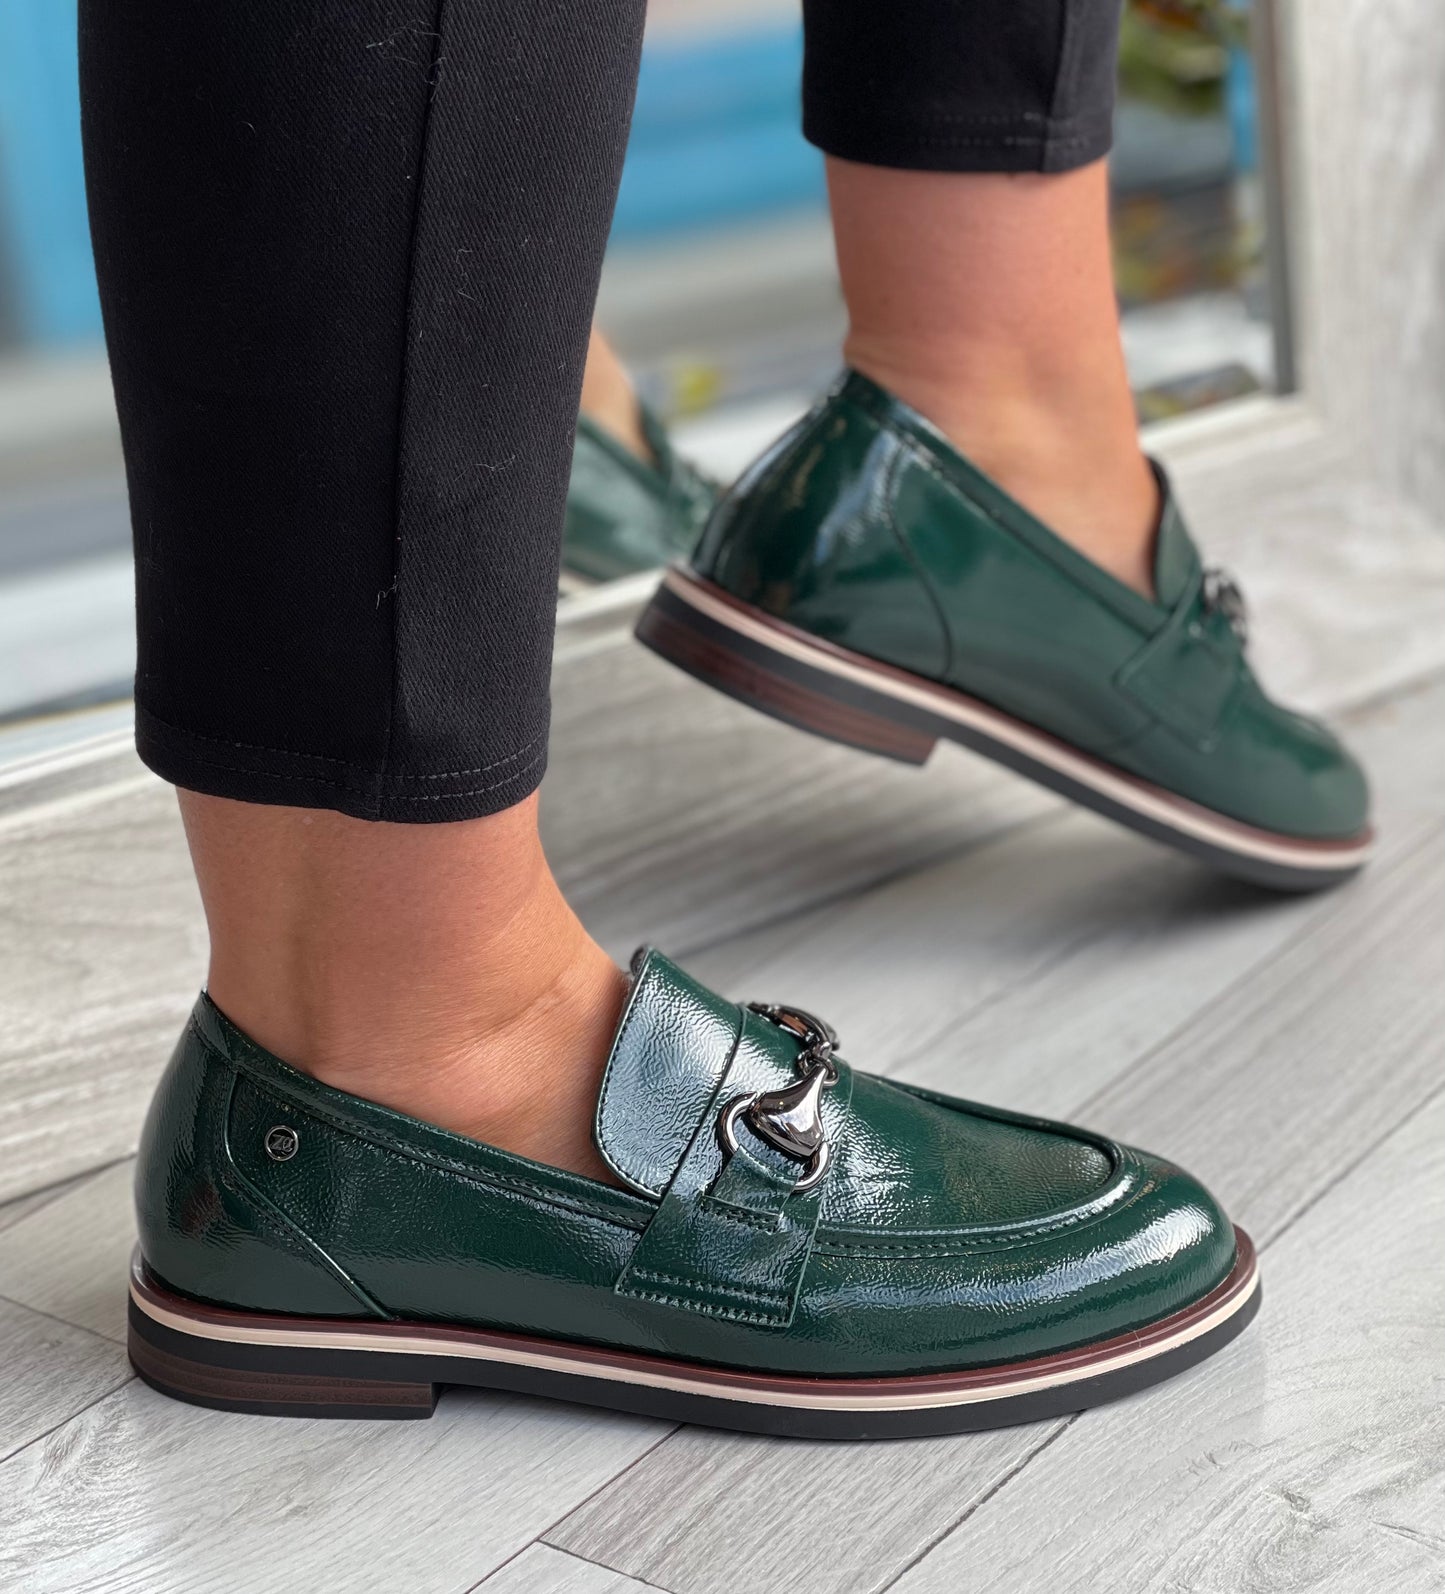 Zanni & Co - 'Afulas One' Forest Green Loafer